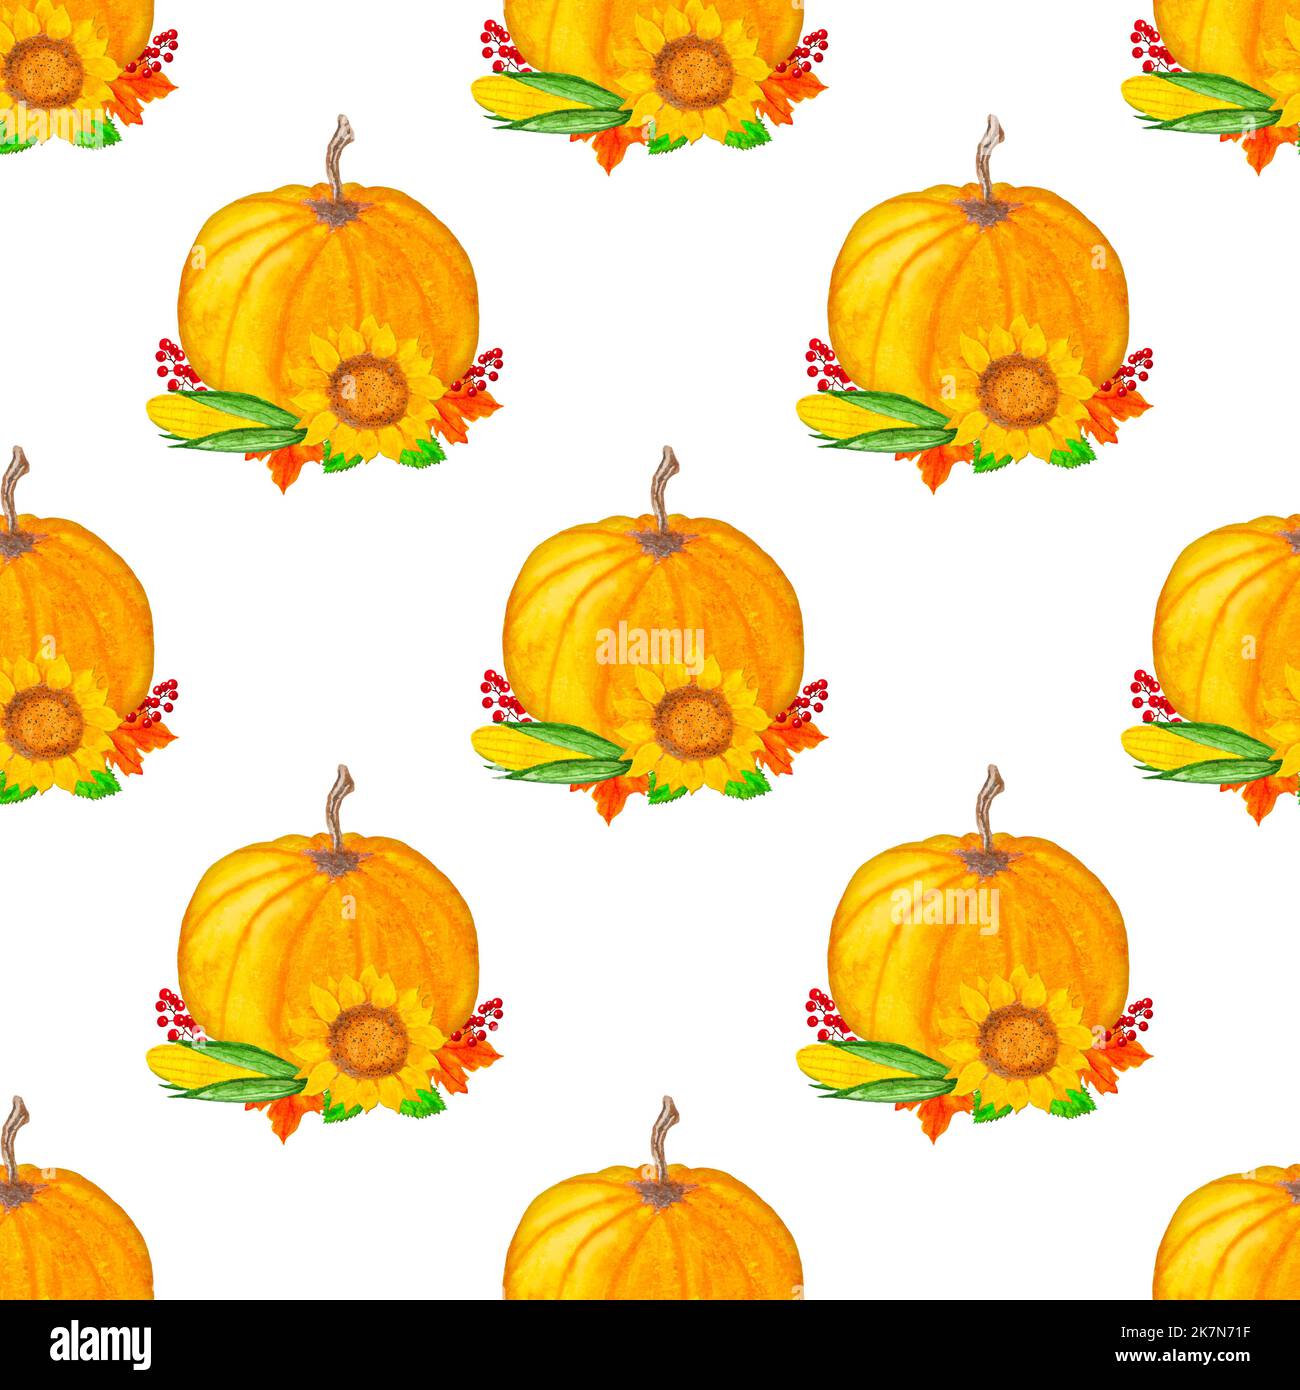 Thanksgiving day background, seamless background with watercolor pumpkins, autumn leaves, berries,watercolor raster Thanksgiving pattern Stock Photo